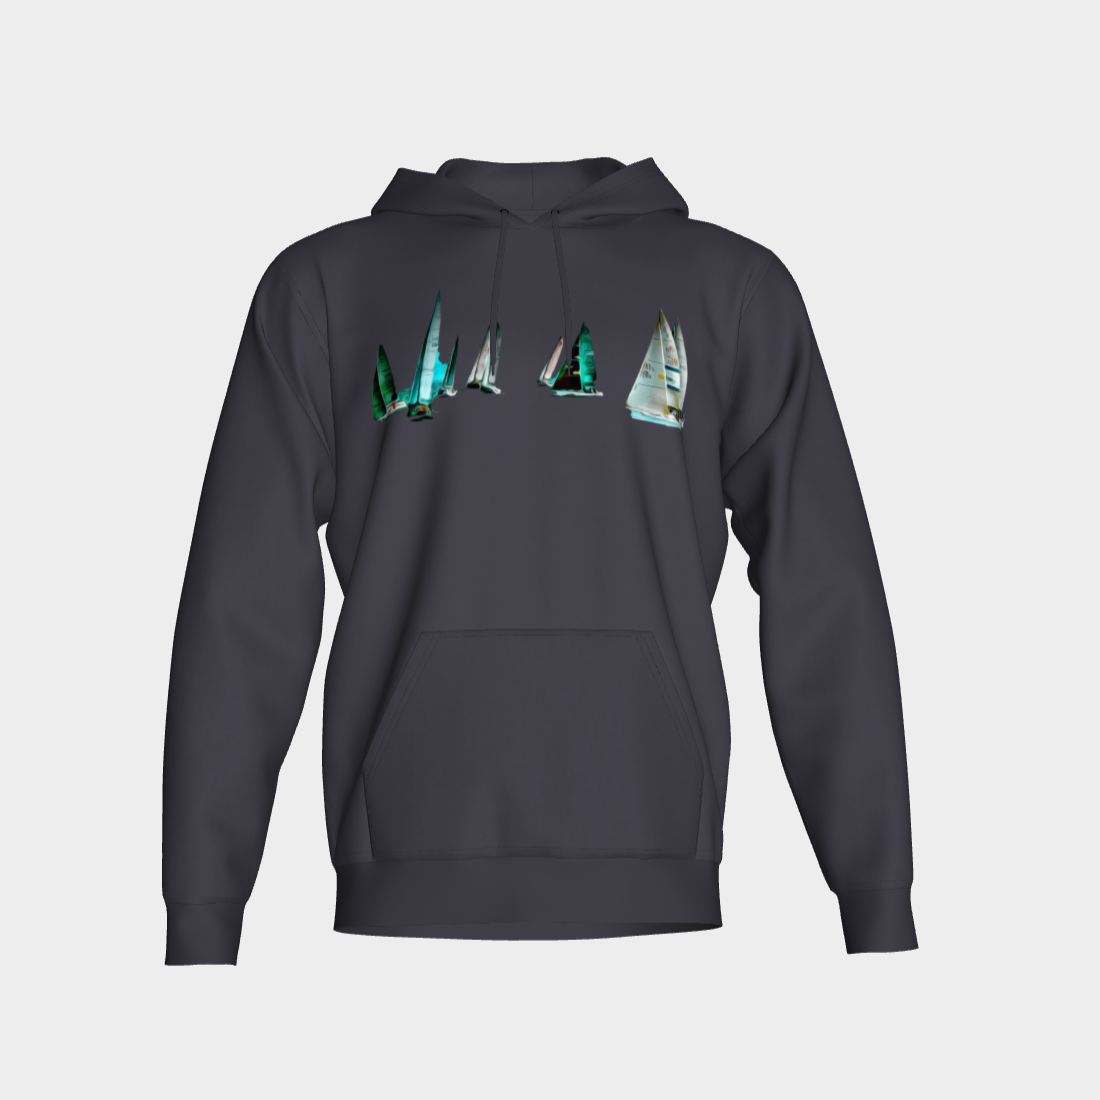 Sail Away Unisex Pullover Hoodie Your Van Isle Goddess unisex pullover hoodie is a great classic hoodie!  Created with state of the art tri-tex material which is a non-shrink poly middle encased in two layers of ultra soft cotton face and lining.